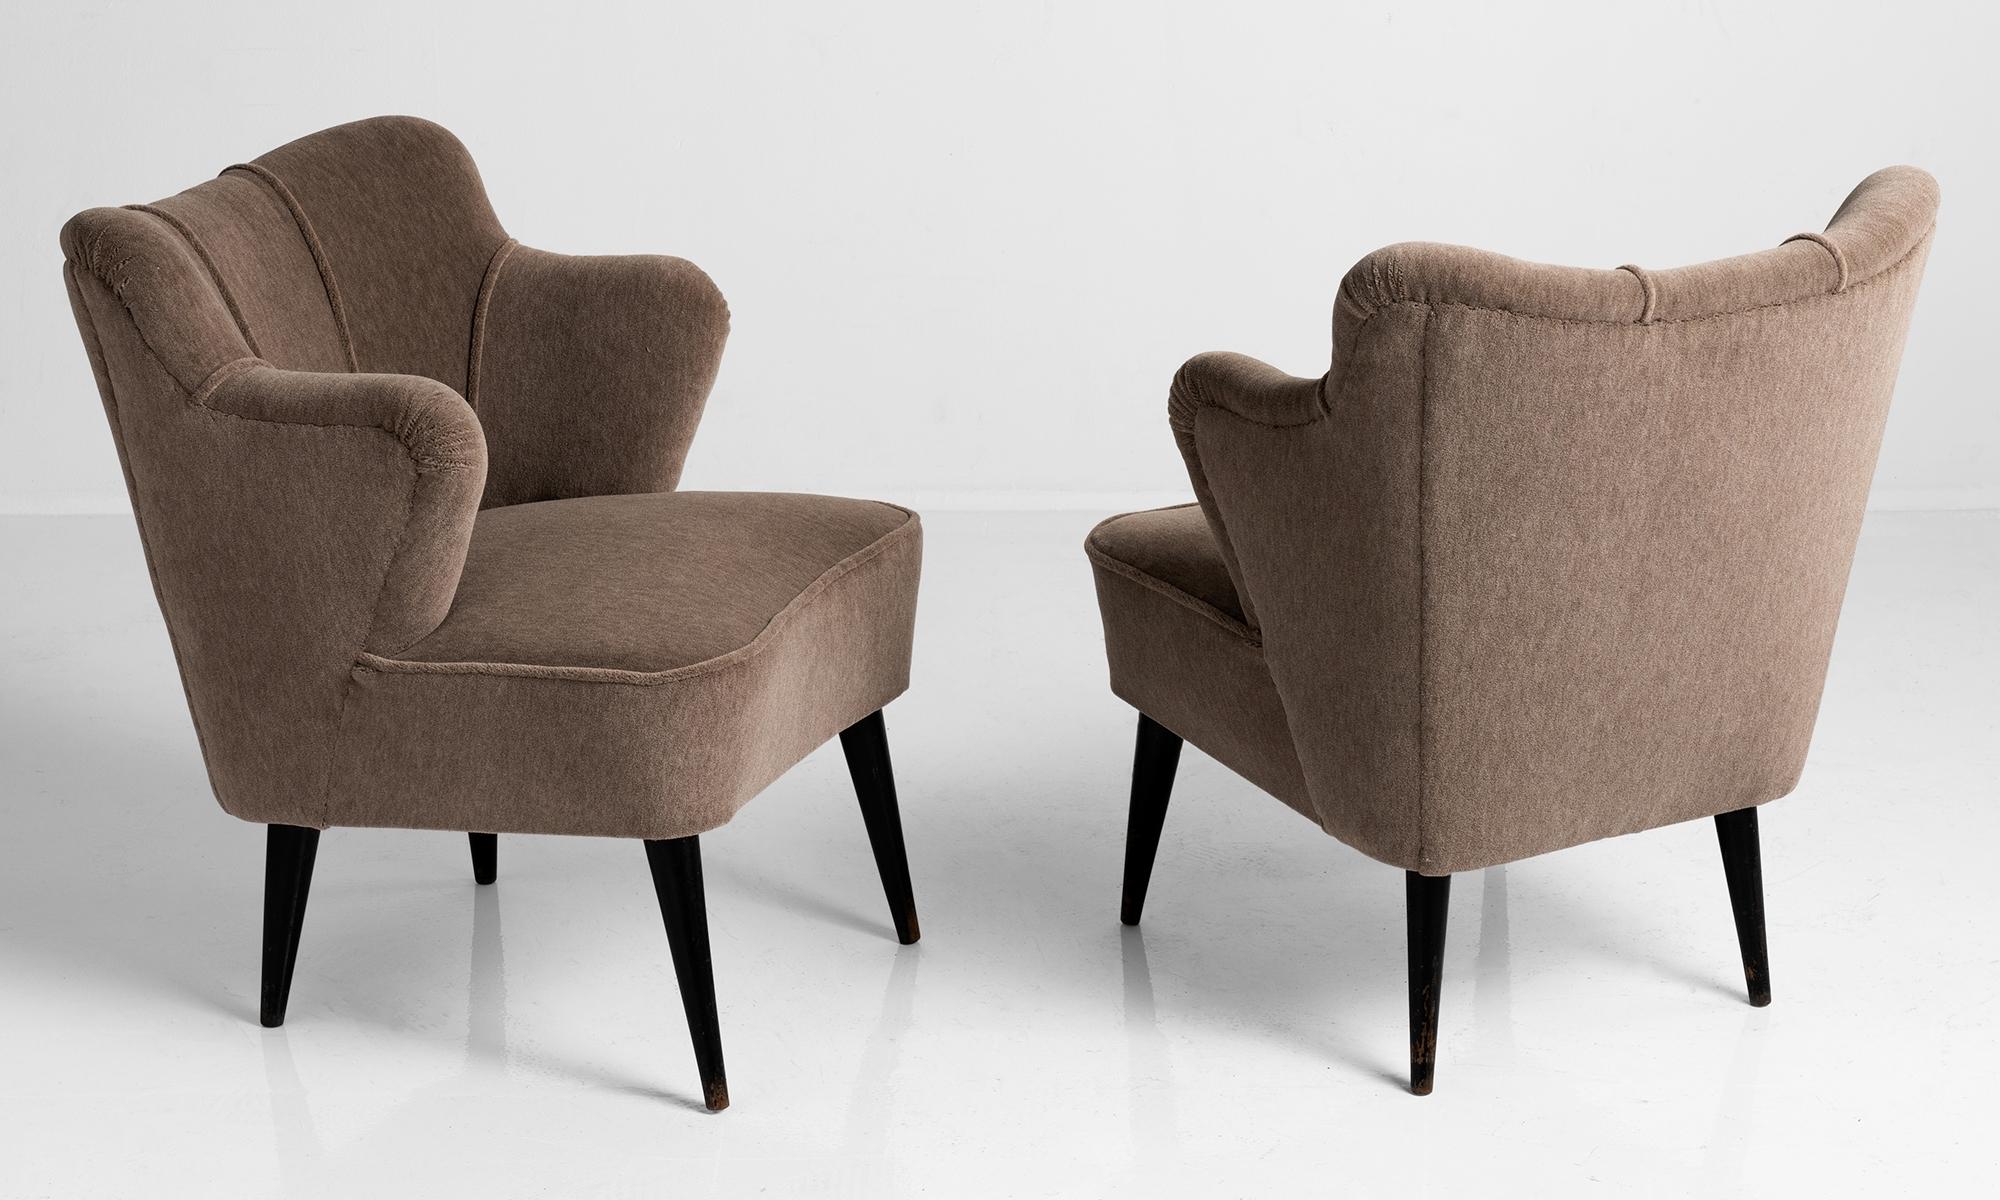 Unique modern forms with shortened armrests, newly upholstered in Maharam Mohair Supreme.